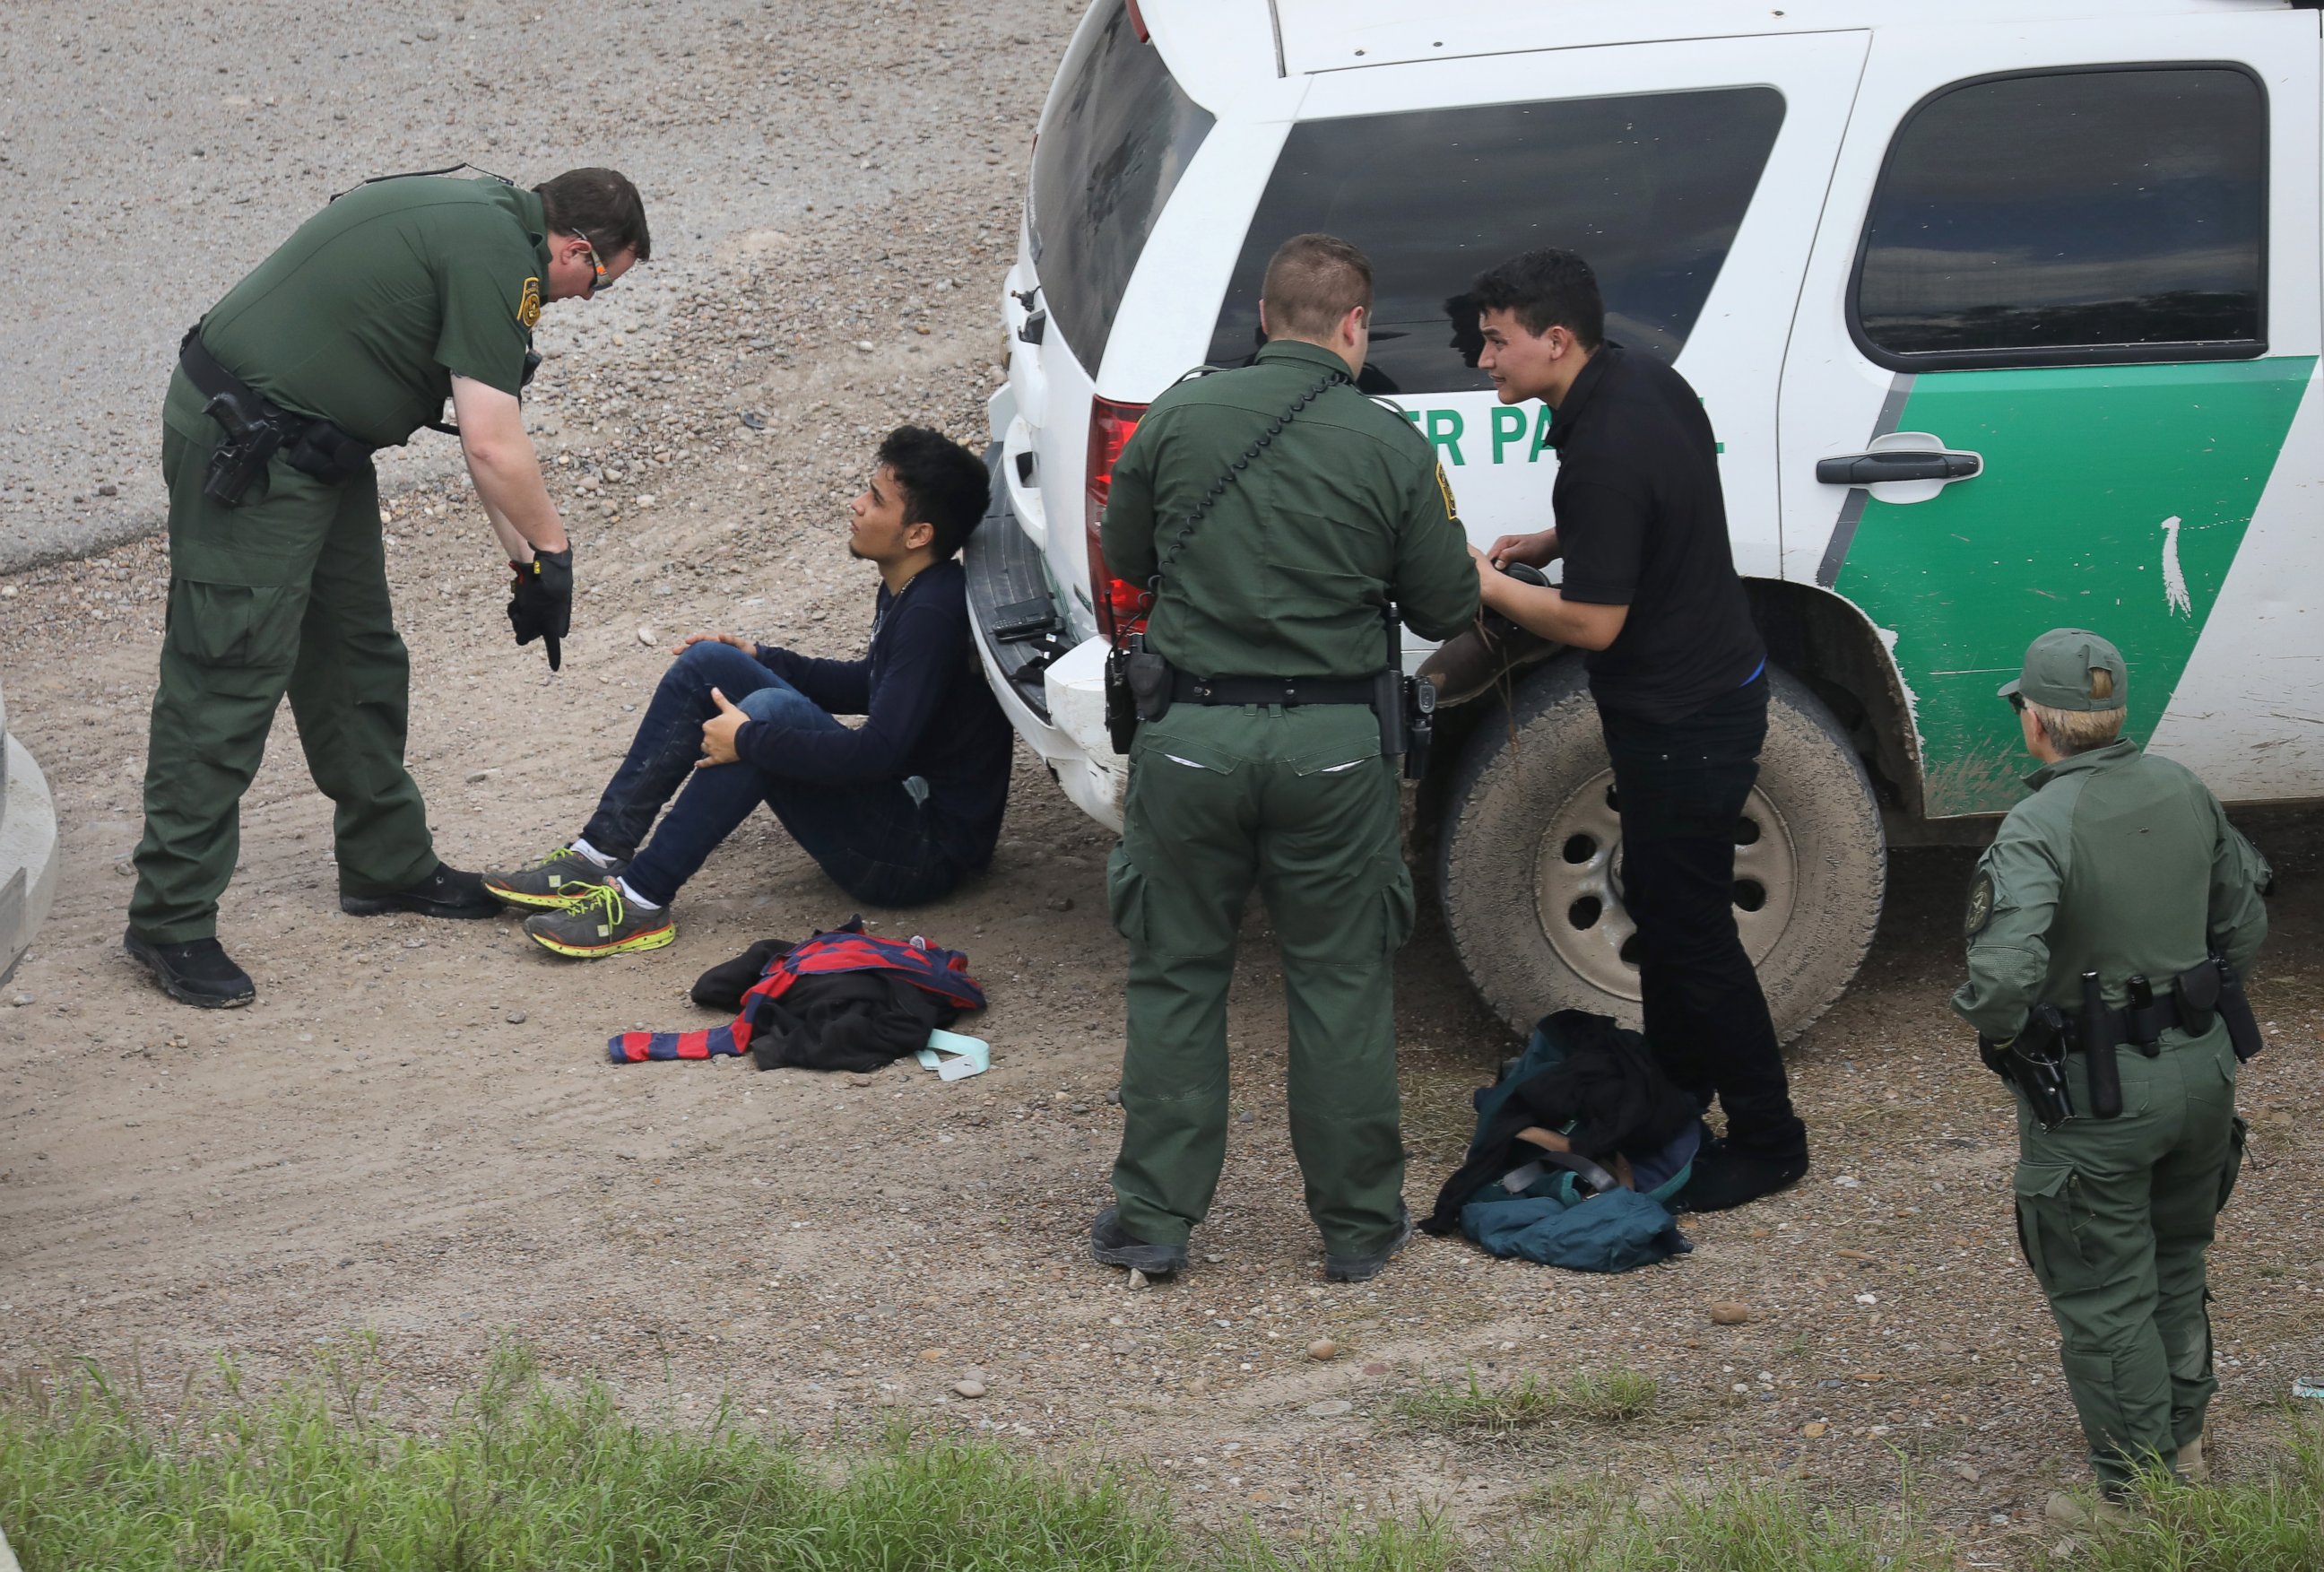 PHOTO: U.S. Border Patrol agents detain two undocumented immigrants after capturing them near the U.S. and Mexico border, on March 15, 2017, near McAllen, Texas. 